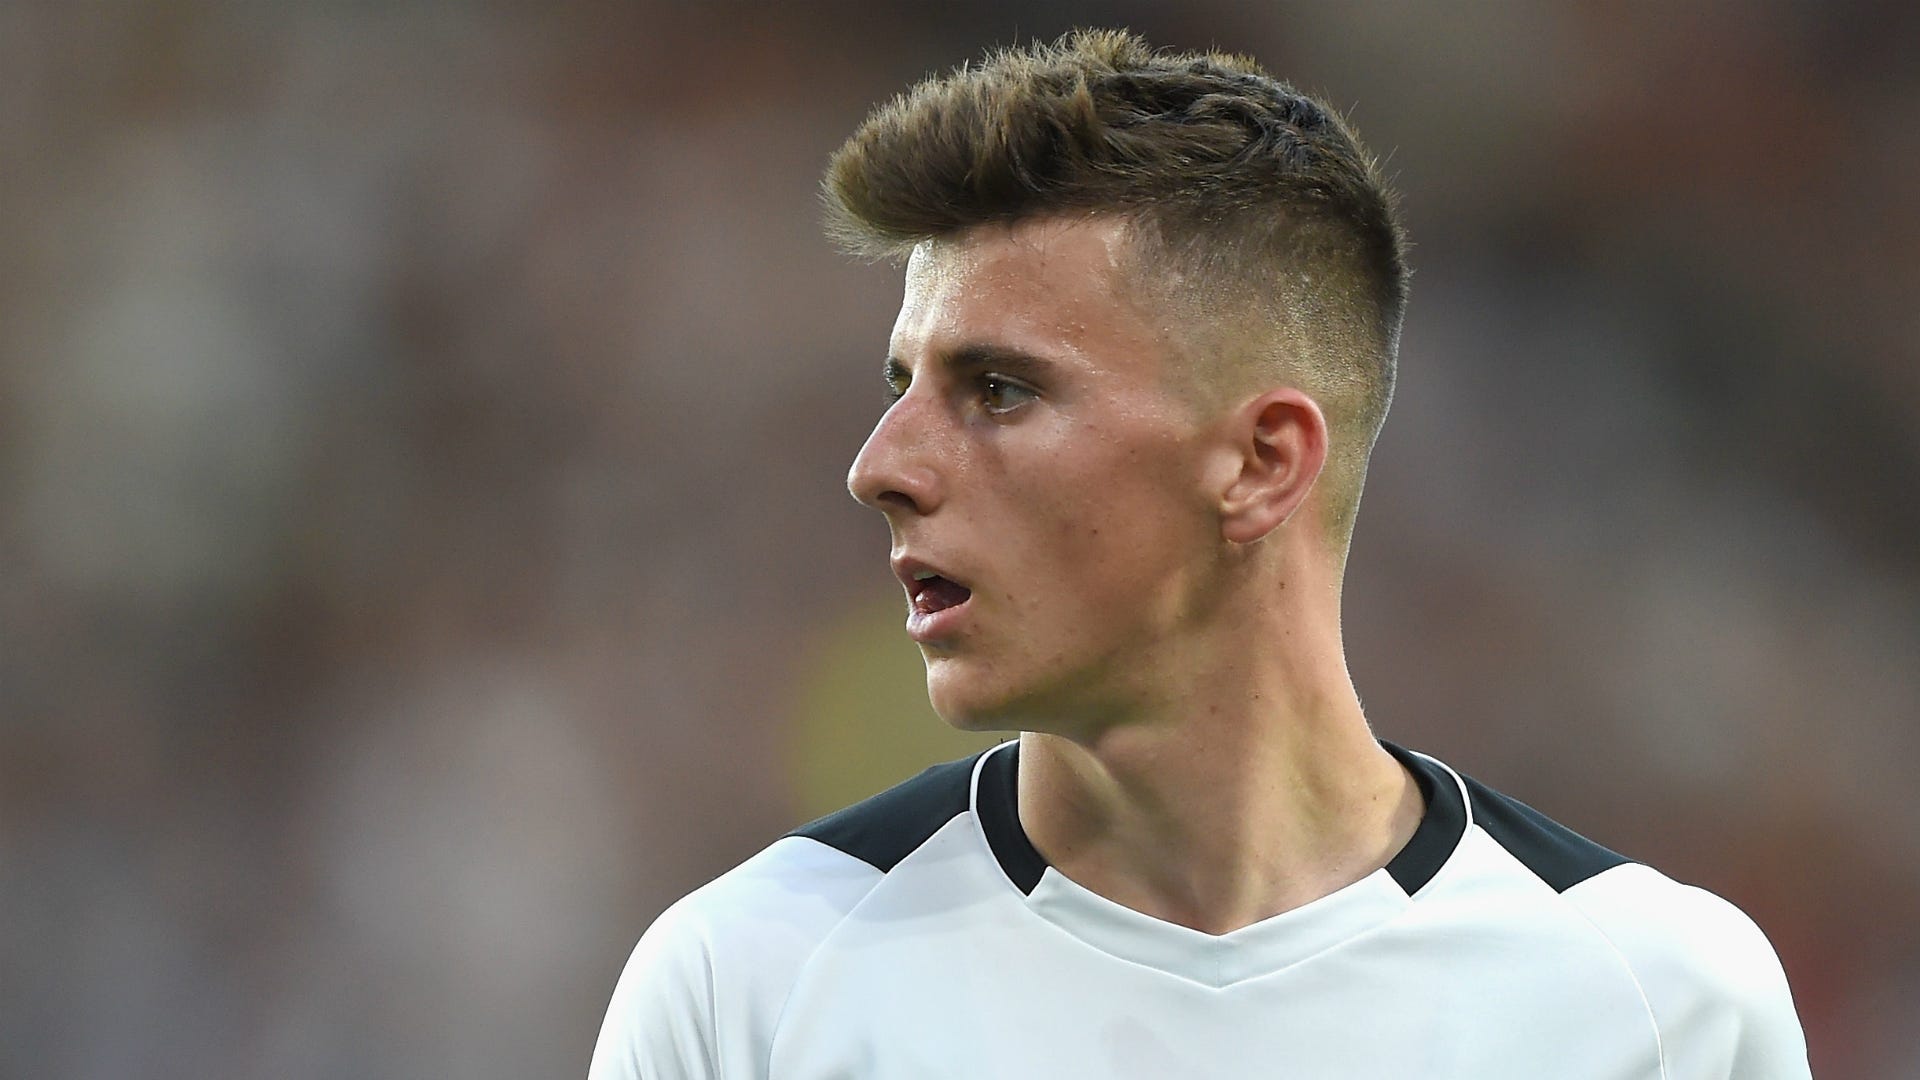 England squad: 'Having the England manager watching gives you confidence' -  Mason Mount on first international call-up  Australia